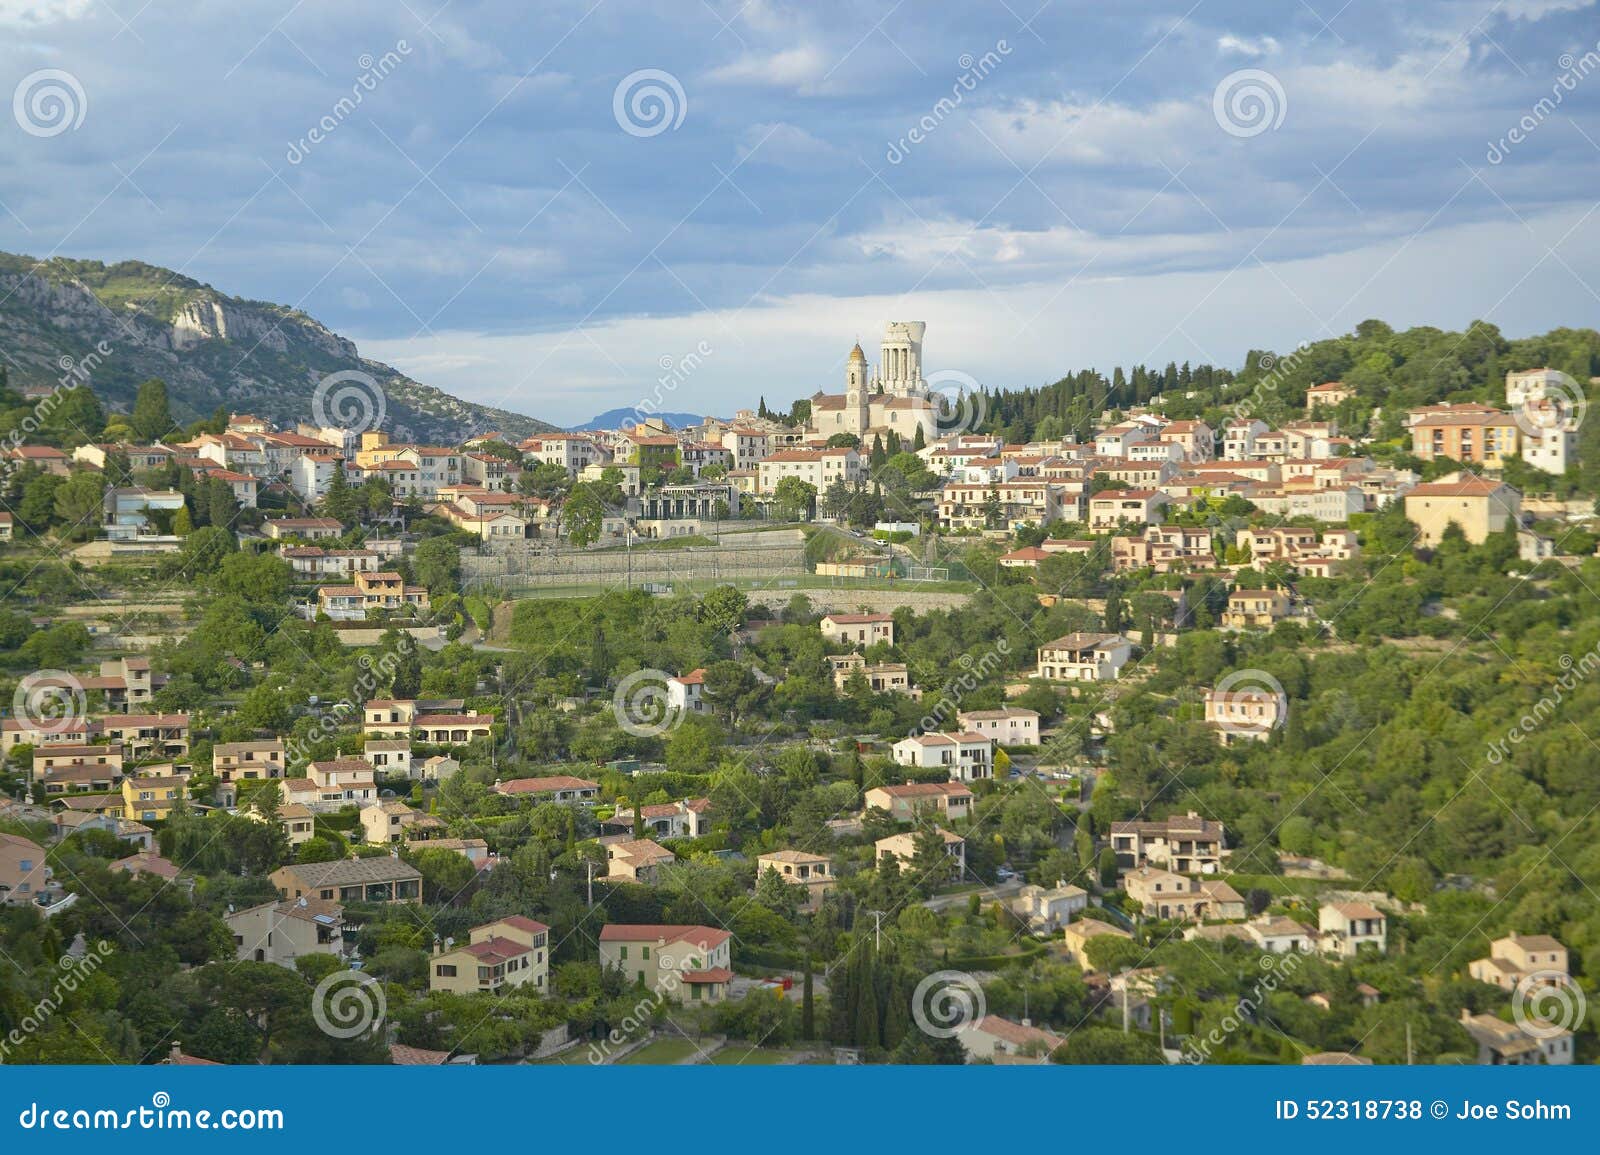 town of la turbie with trophee des alpes and church, france